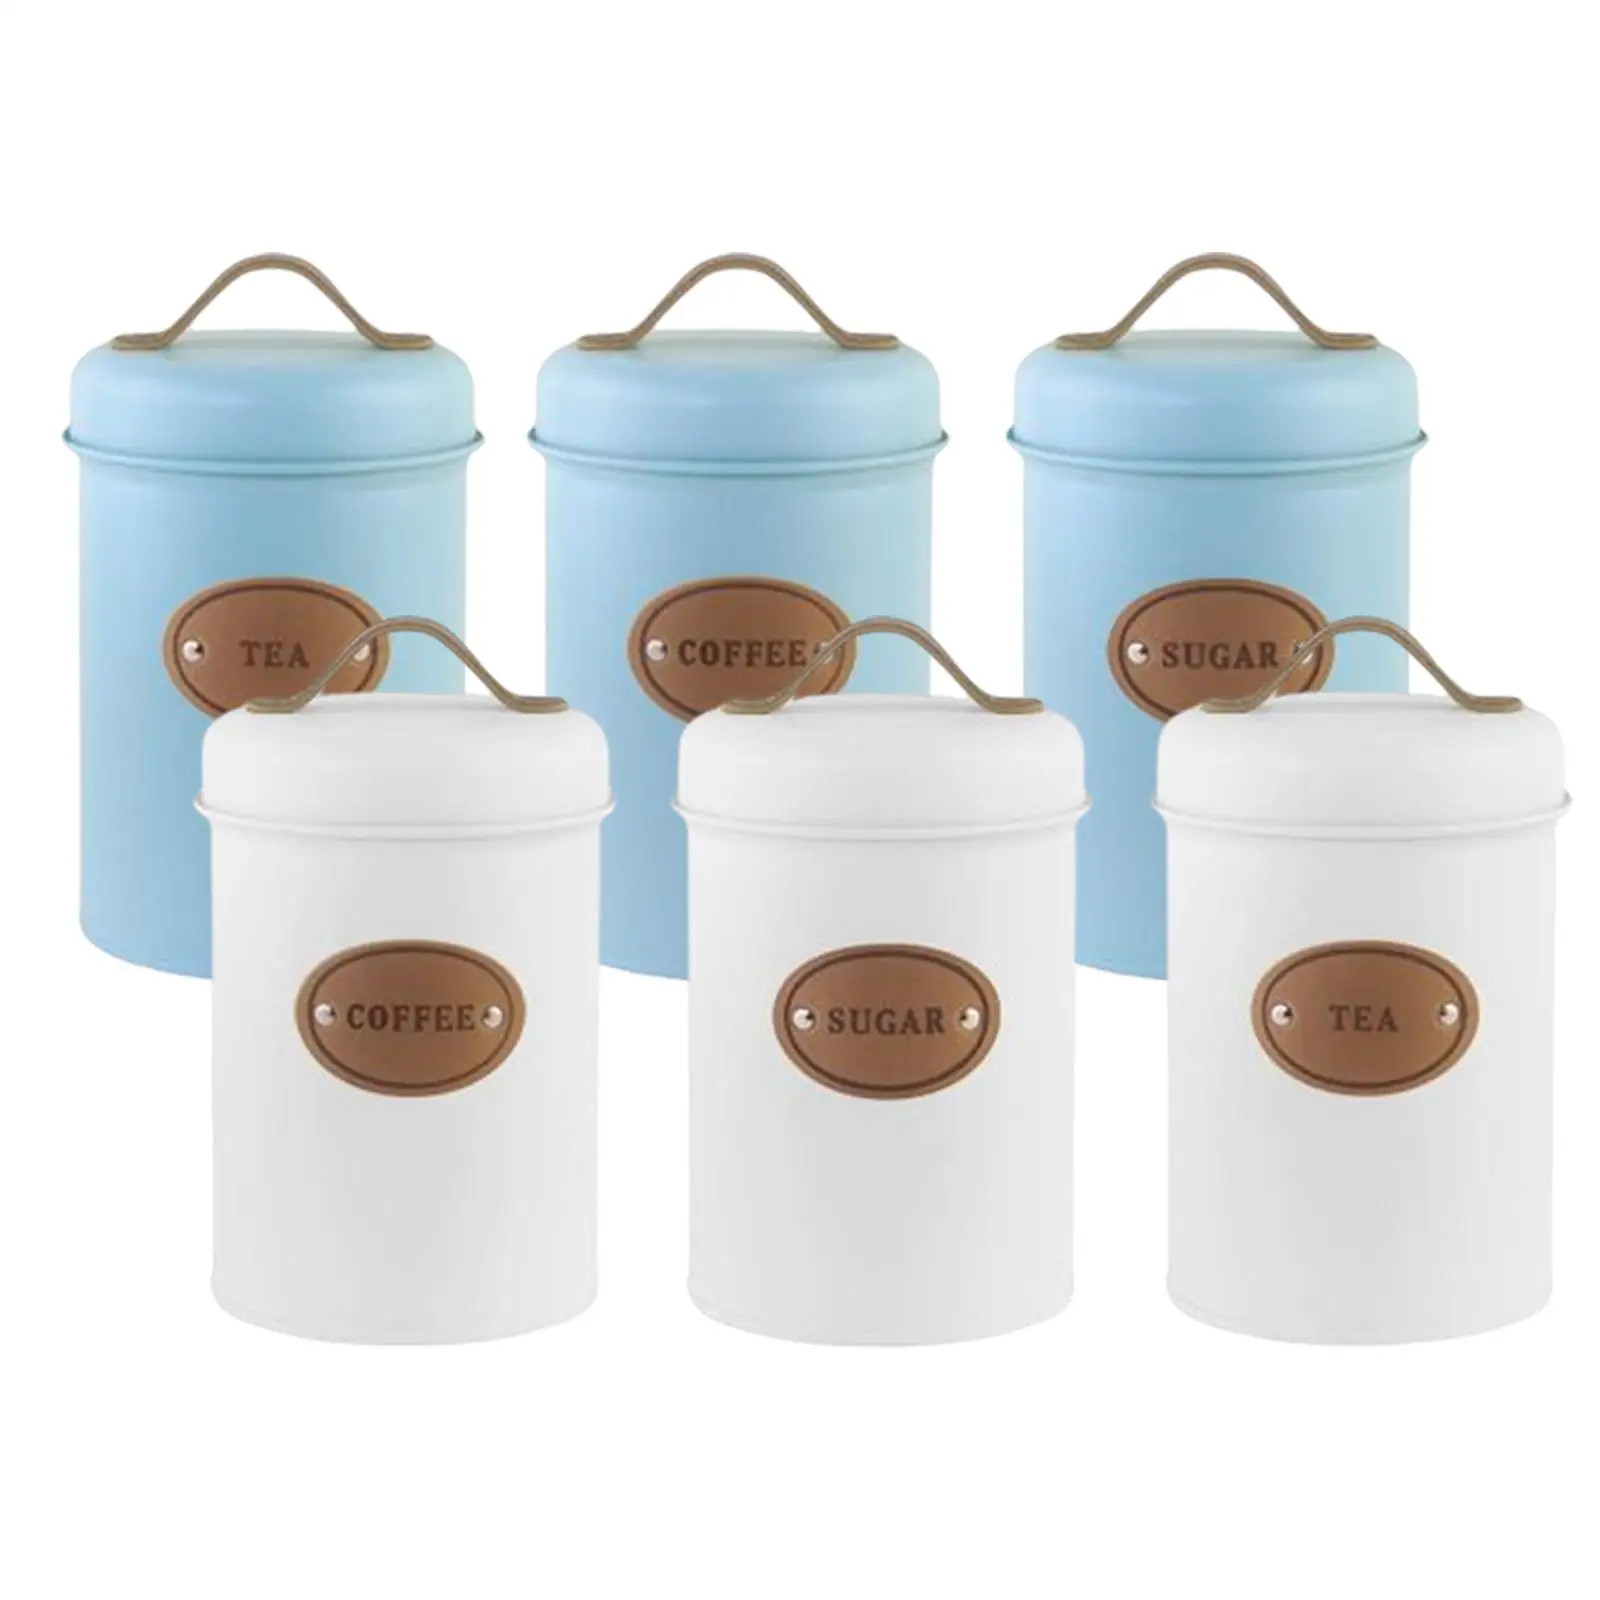 Storage Canisters with Tight Sealing Sugar Coffee Tea Organization Durable Kitchen Canister Set for Kitchen Restaurant Bedroom